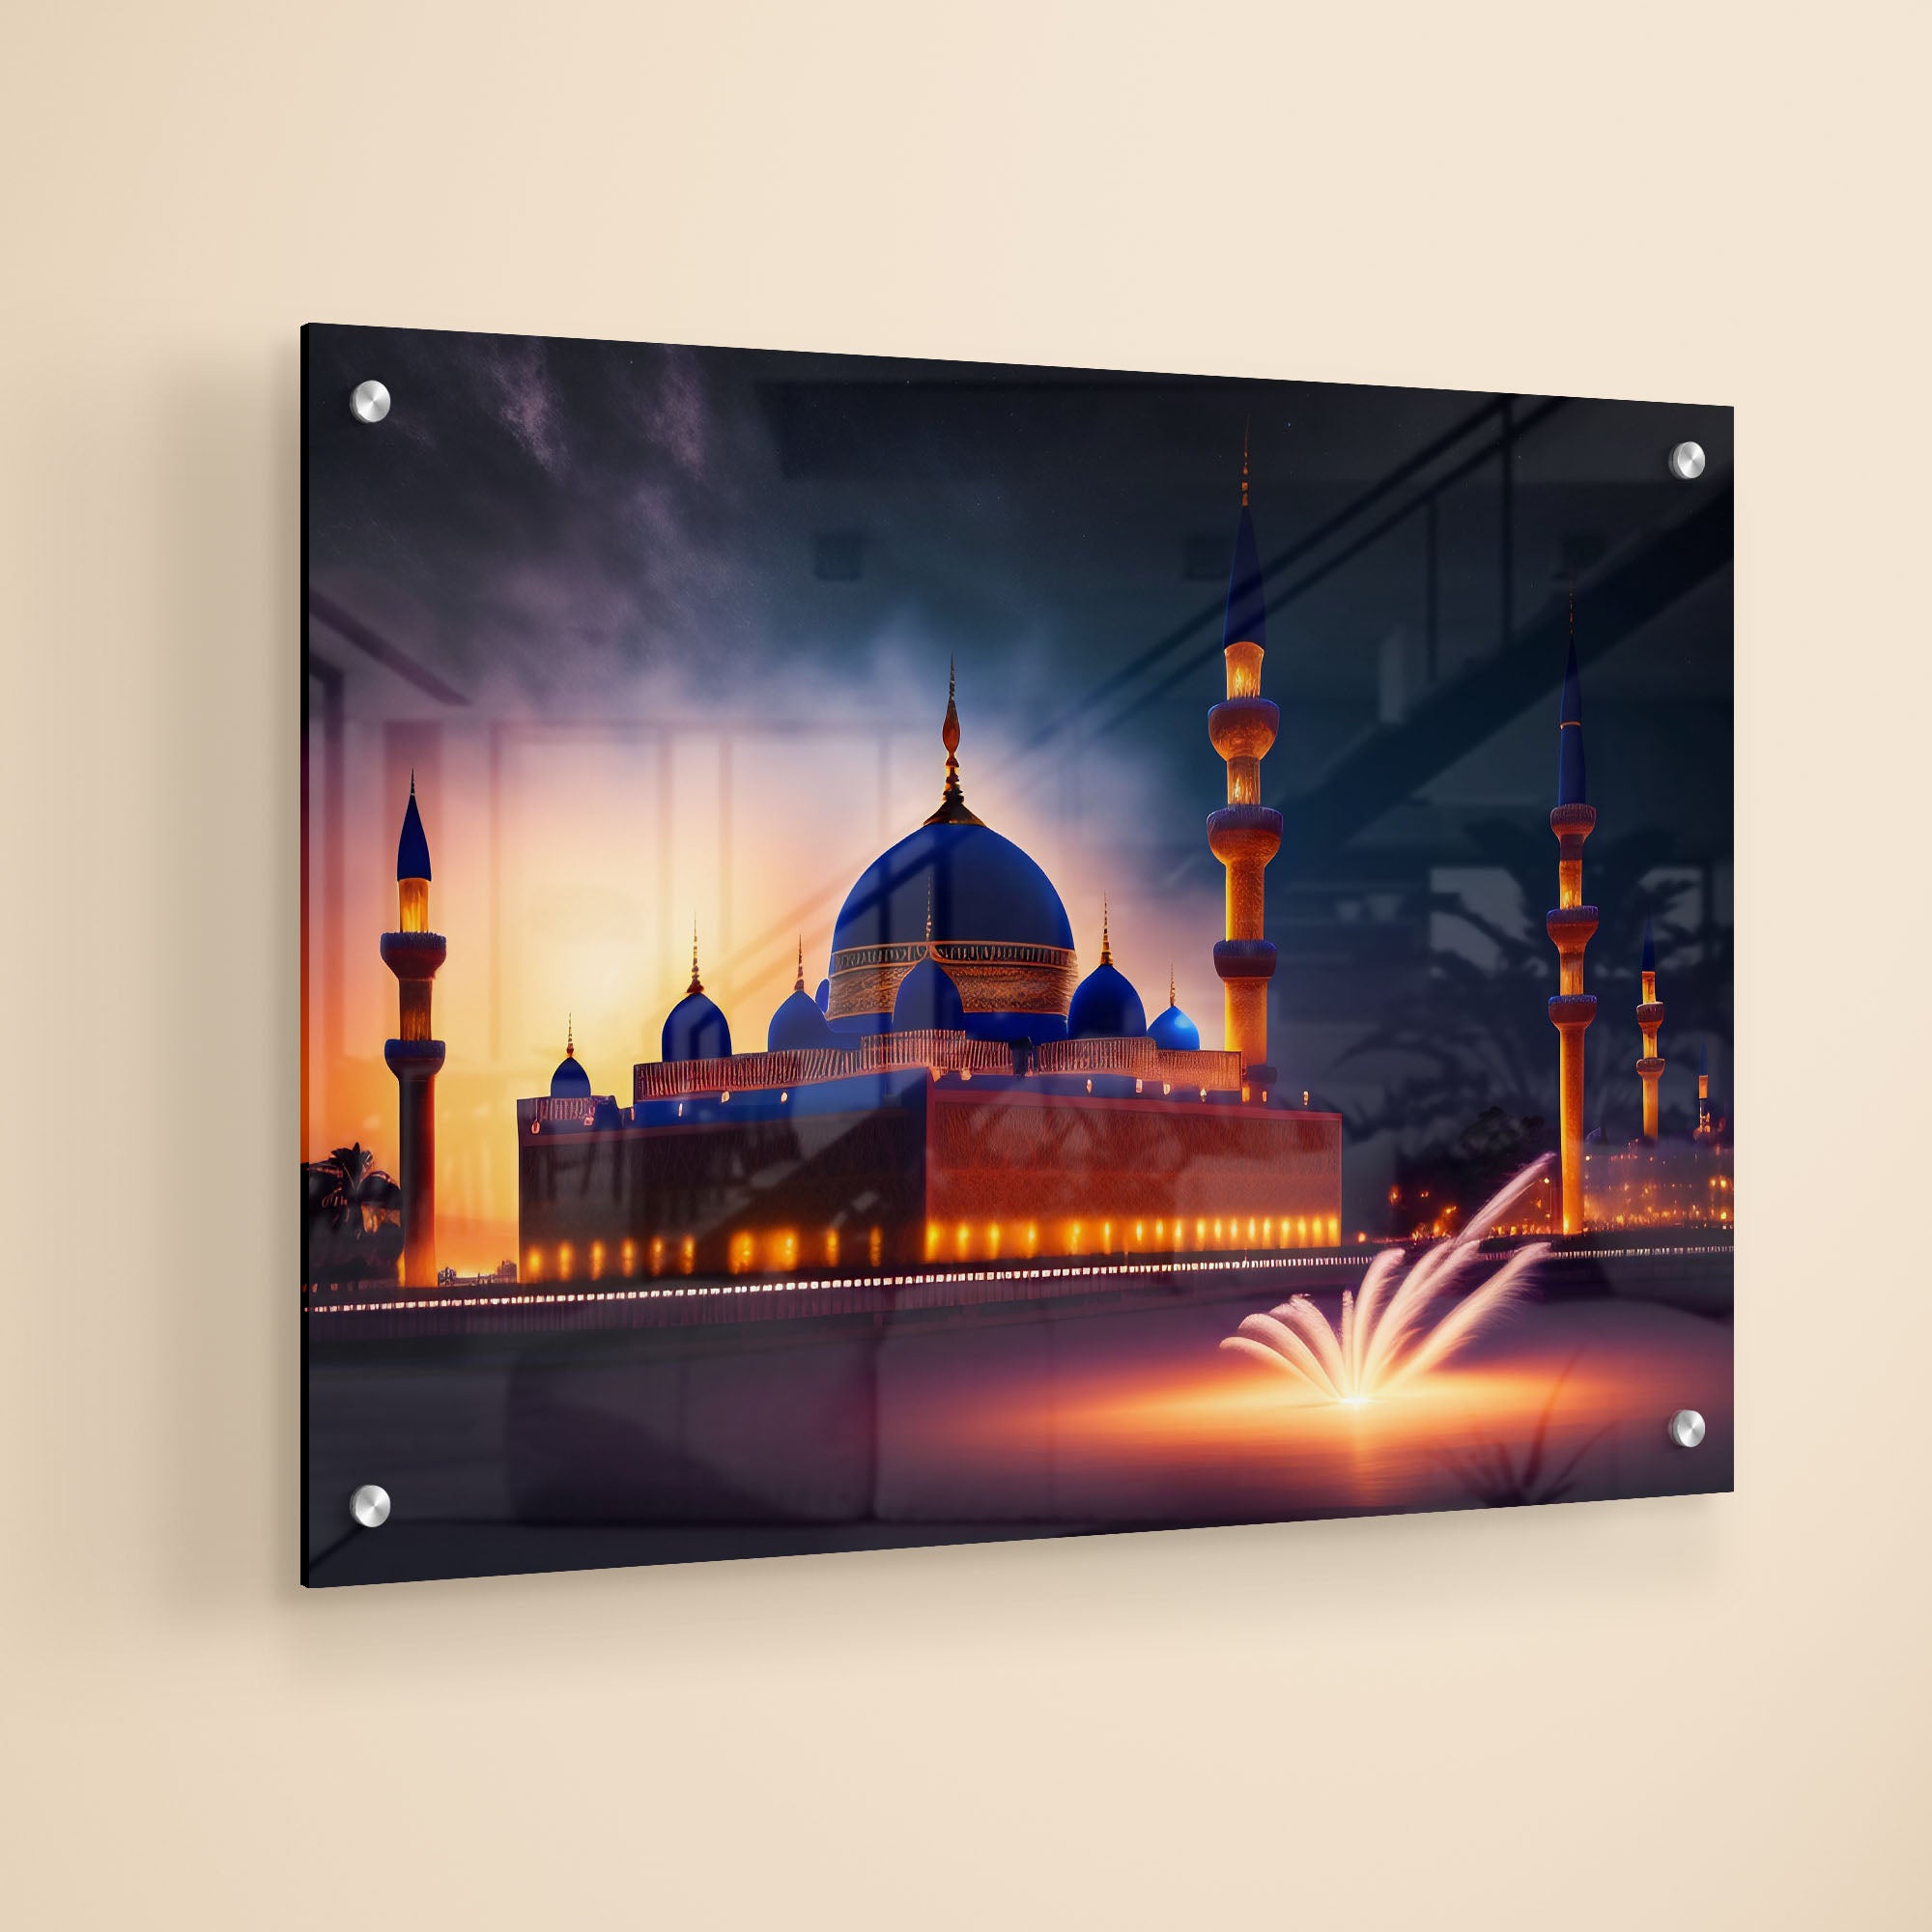 Islamic Attractive Mosque Acrylic Wall Painting